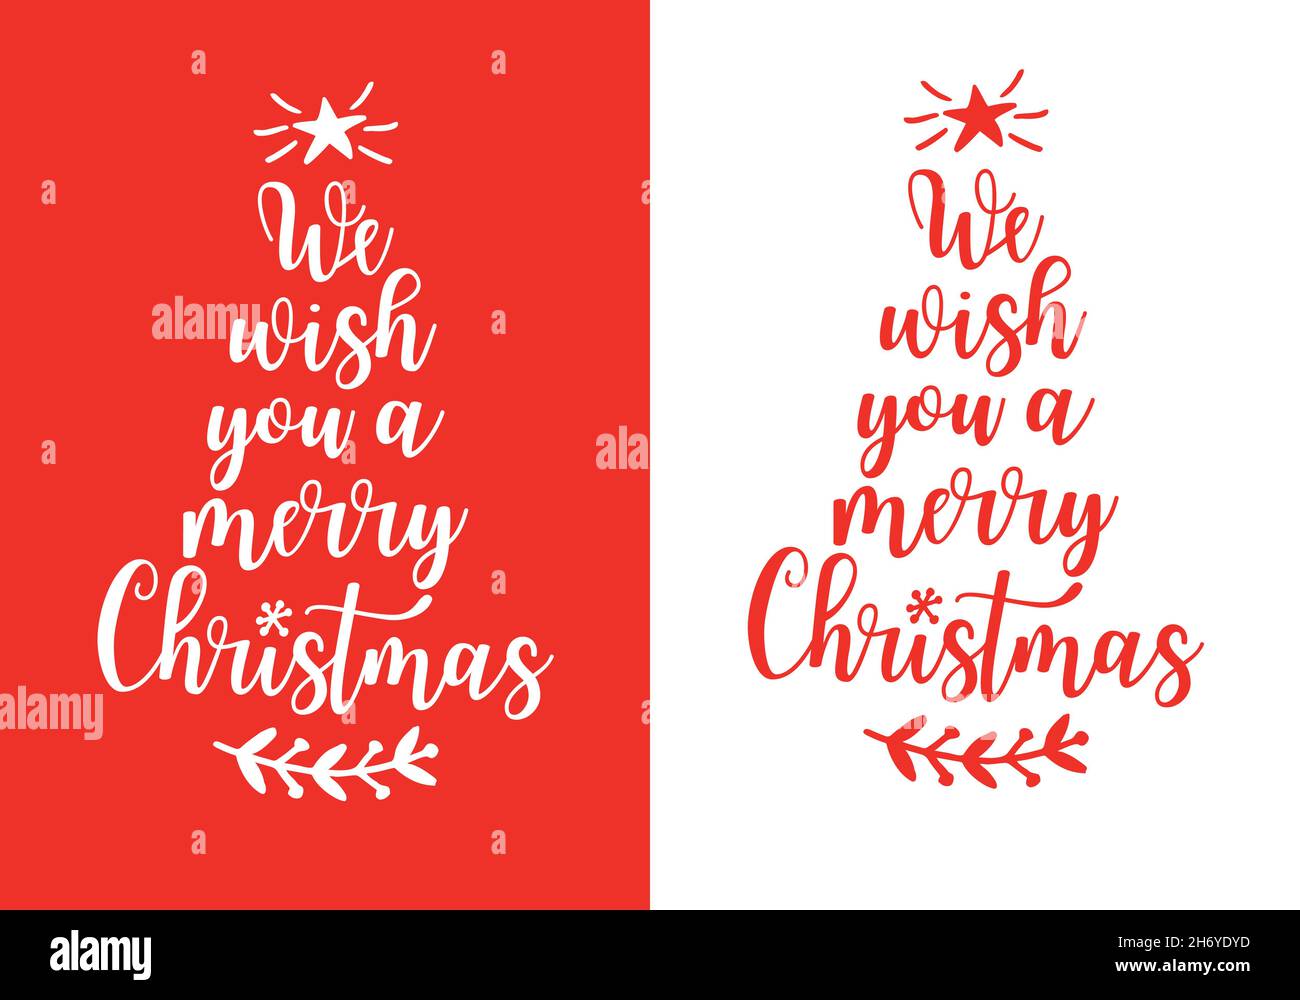 Handwritten Christmas card with tree, red and white background, vector graphic design elements Stock Vector